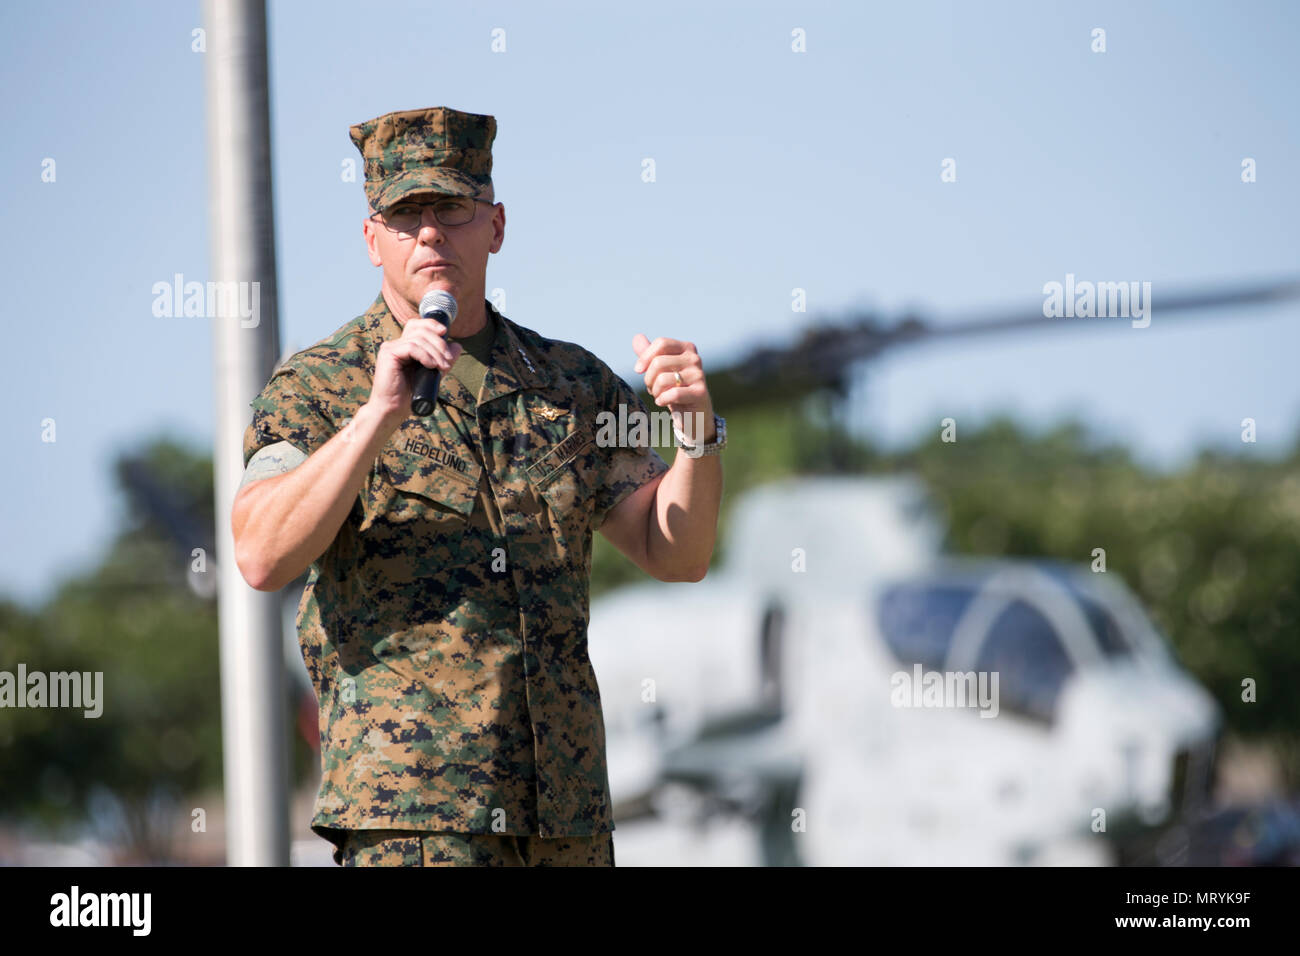 U.S. Marine Corps Lt. Gen. Robert F. Hedelund, commanding general of the II Marine Expeditionary Force (MEF), speaks to the audience during the II Marine Expeditionary Force (II MEF) change of command ceremony on Camp Lejeune, N.C., July 14, 2017. During the ceremony, Maj. Gen. Walter L. Miller Jr. relinquished his command as commanding general of II MEF to Lt. Gen. Hedelund. (U.S. Marine Corps photo by Lance Cpl. Koby I. Saunders) Stock Photo